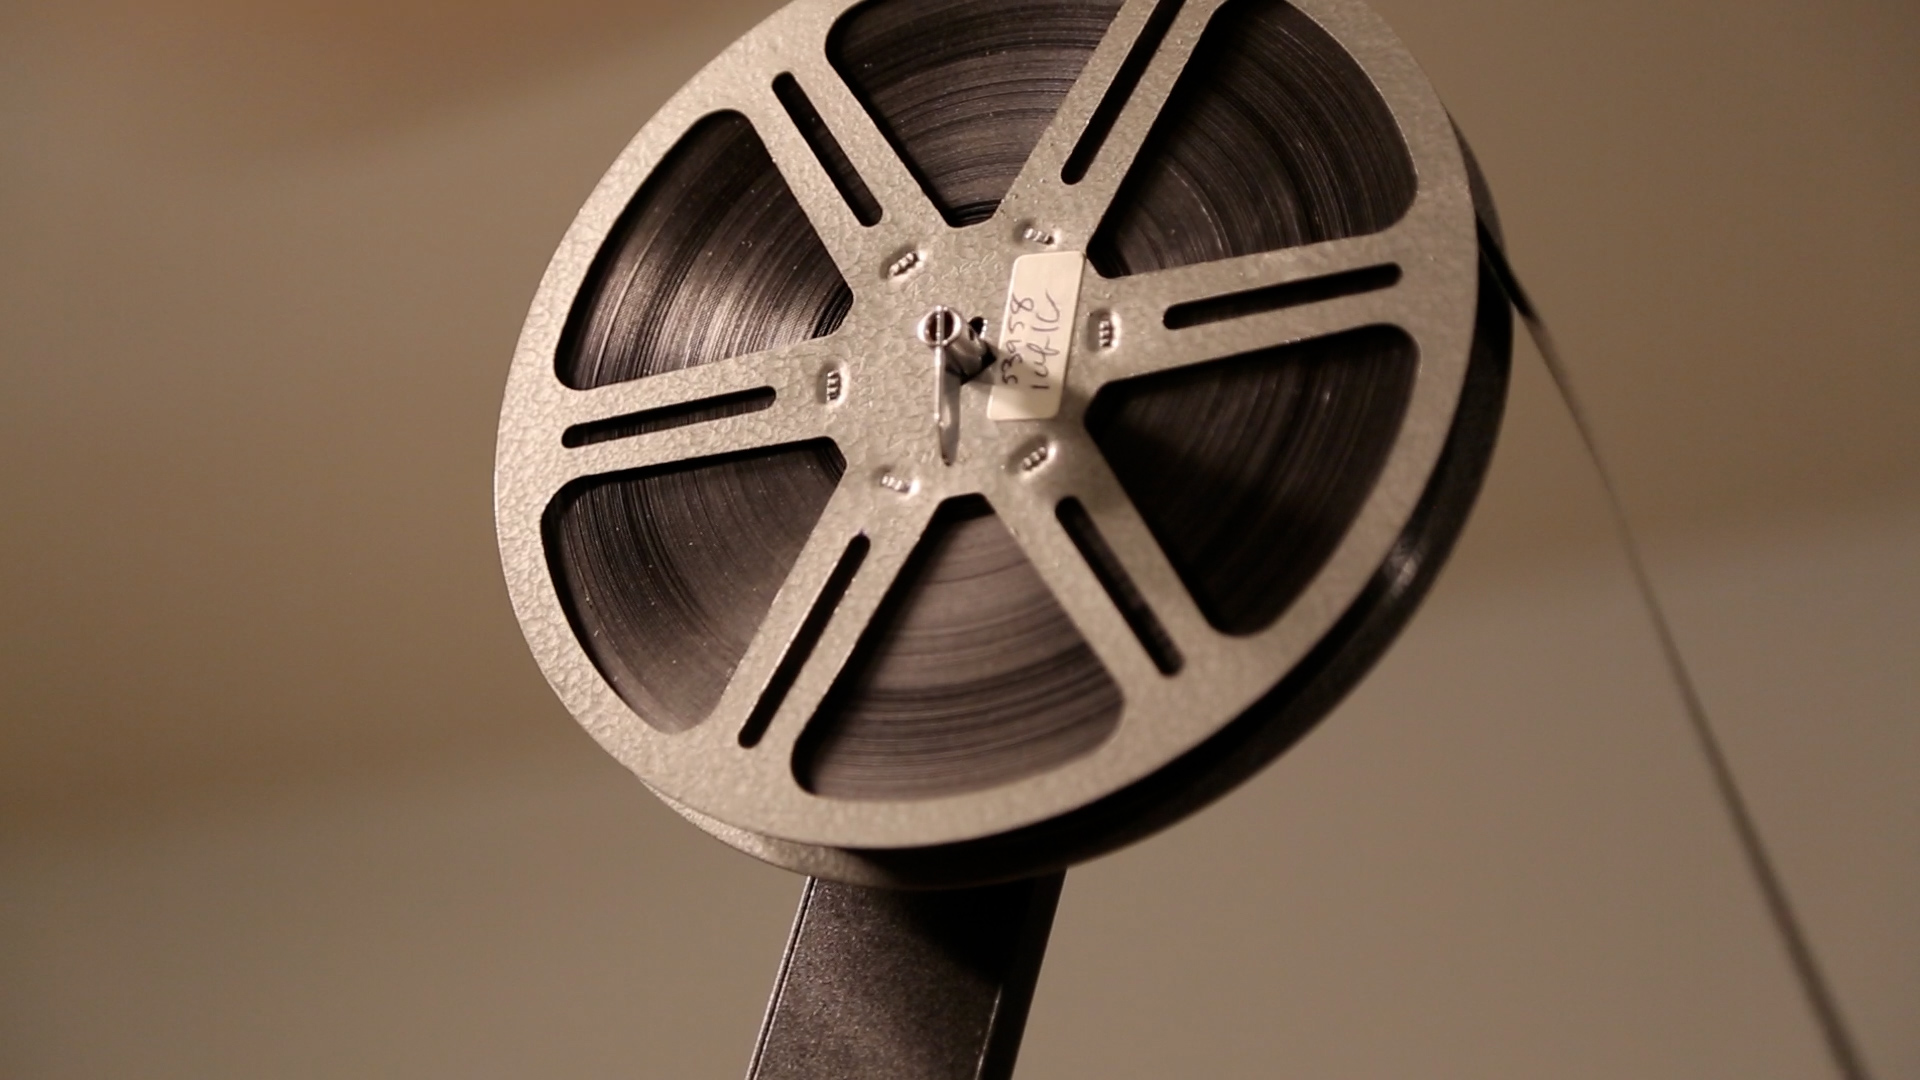 image of a 16mm film